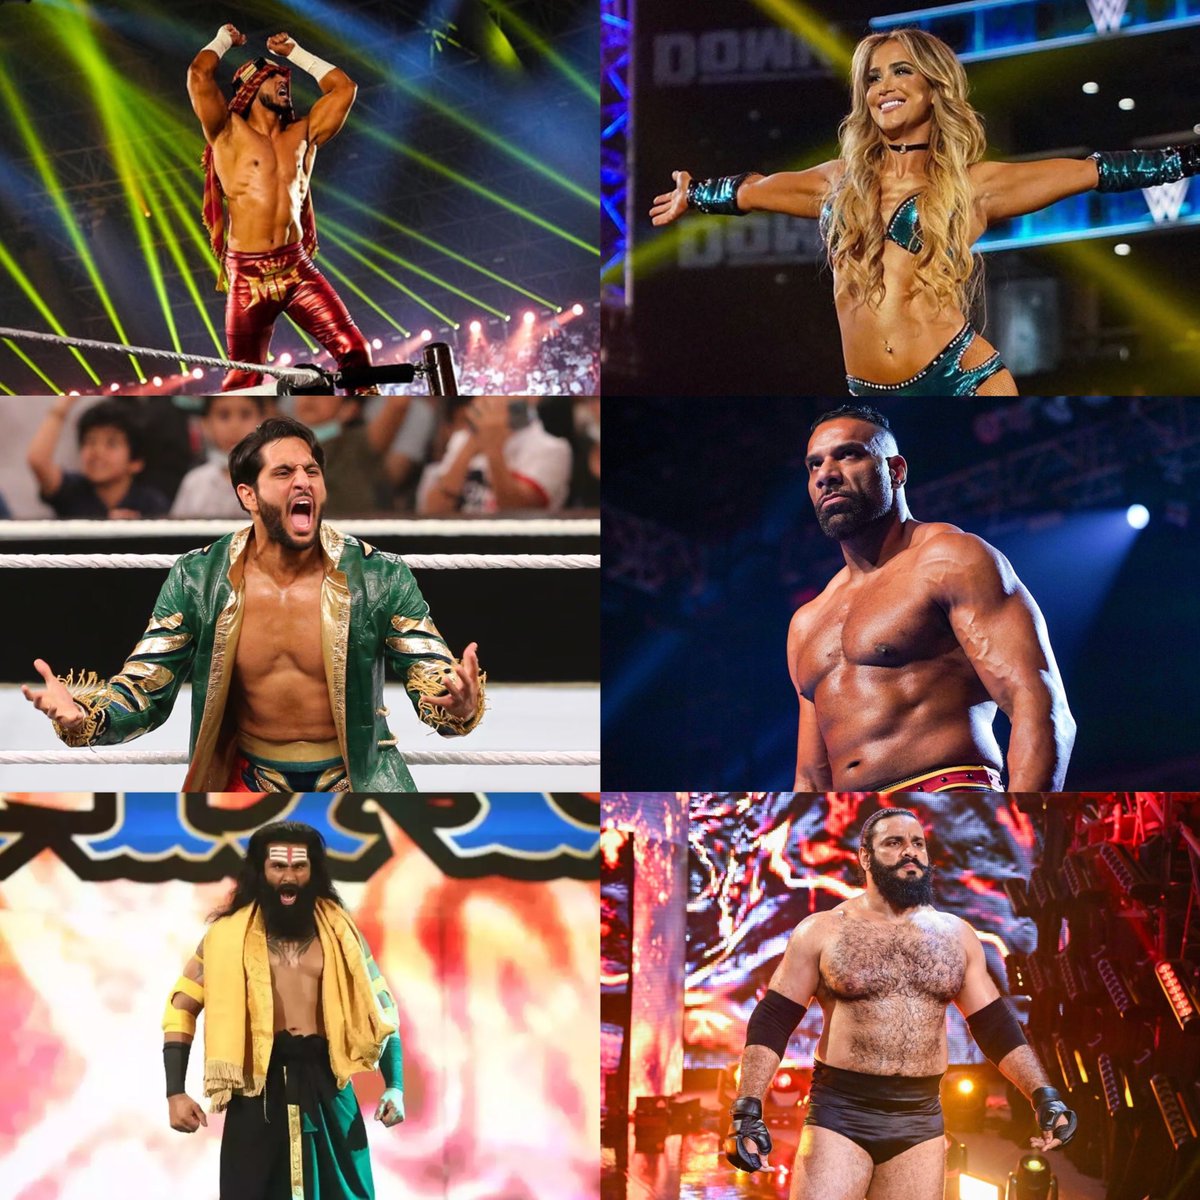 In less than a year WWE has released all Indian talent (all at once) and all Arab talent besides Sami Zayn (all at once). 

September 2023 
- Mustafa Ali 
- Aliyah
- Mansoor

April 2024
- Jinder Mahal
- Veer 
- Sanga 

Is this not crazy to y’all?? 
#SmackDown #WWERAW